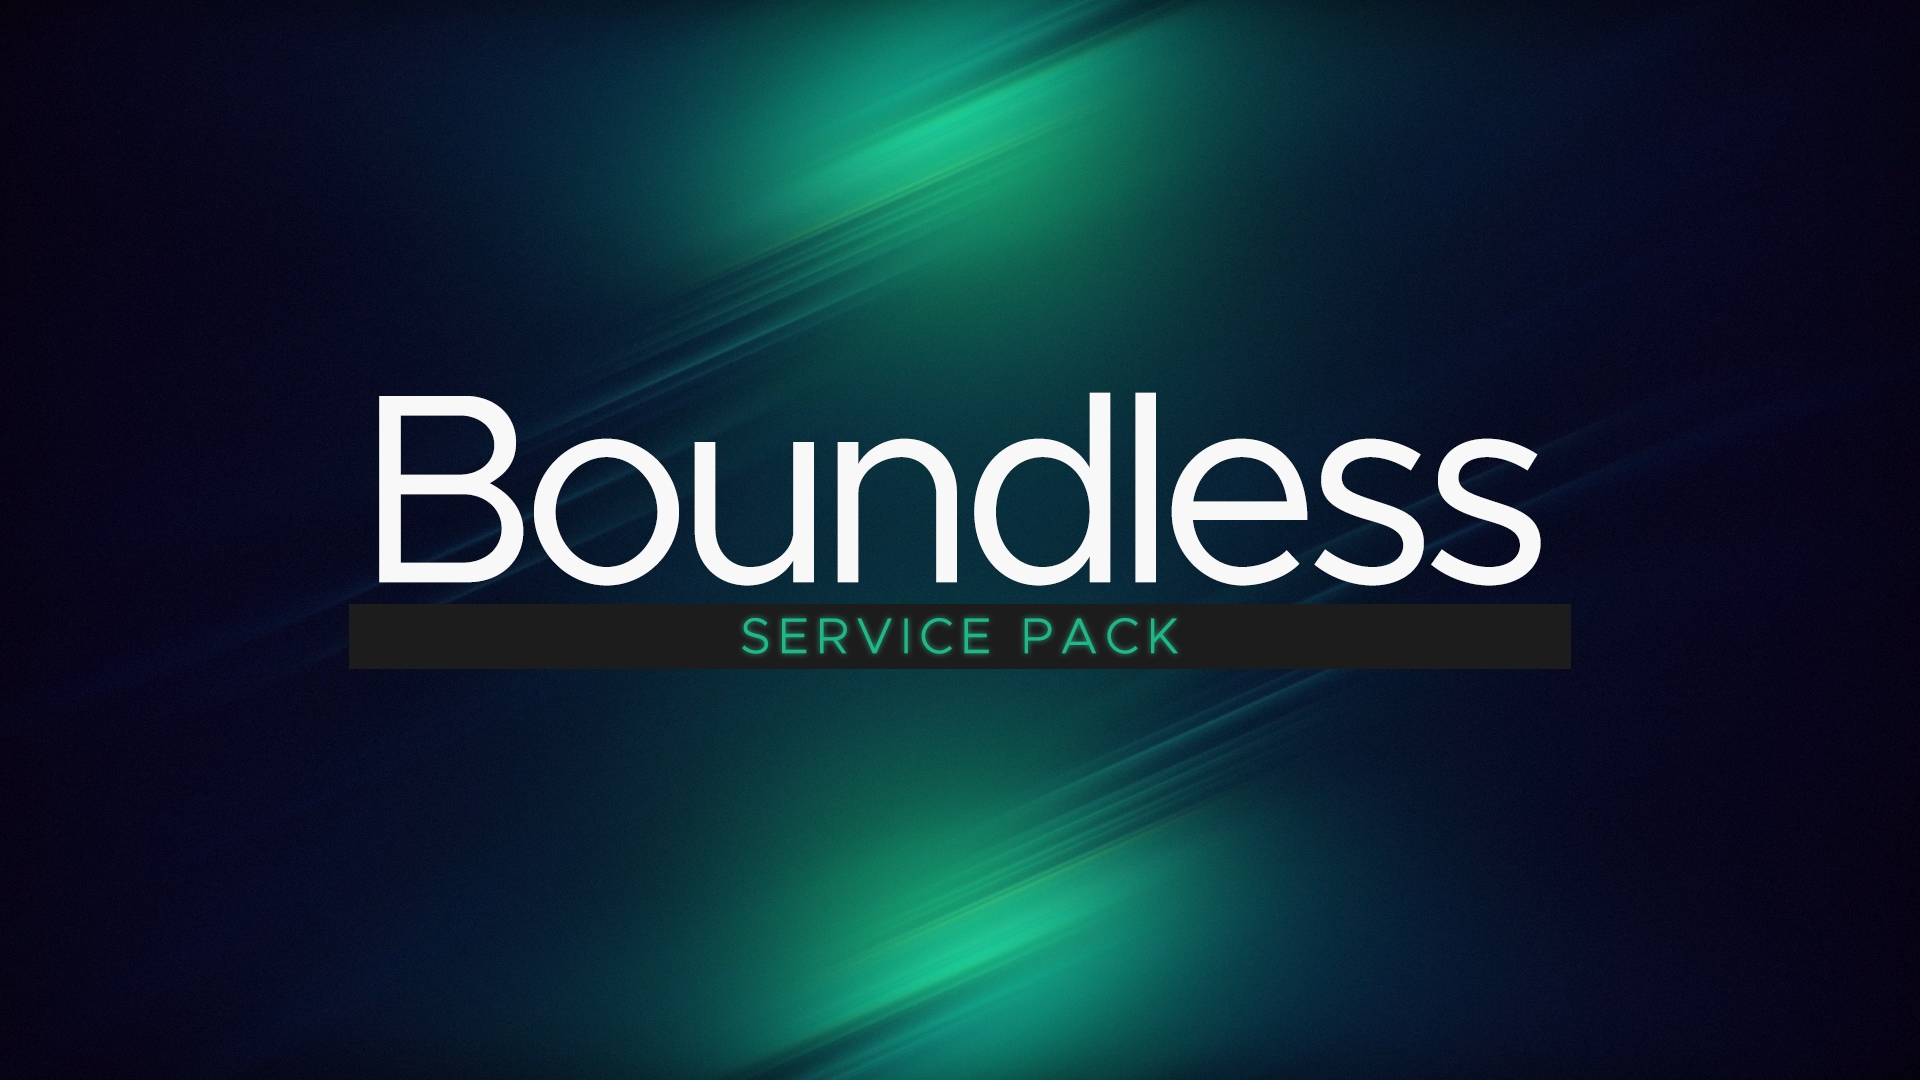 Boundless Service Pack